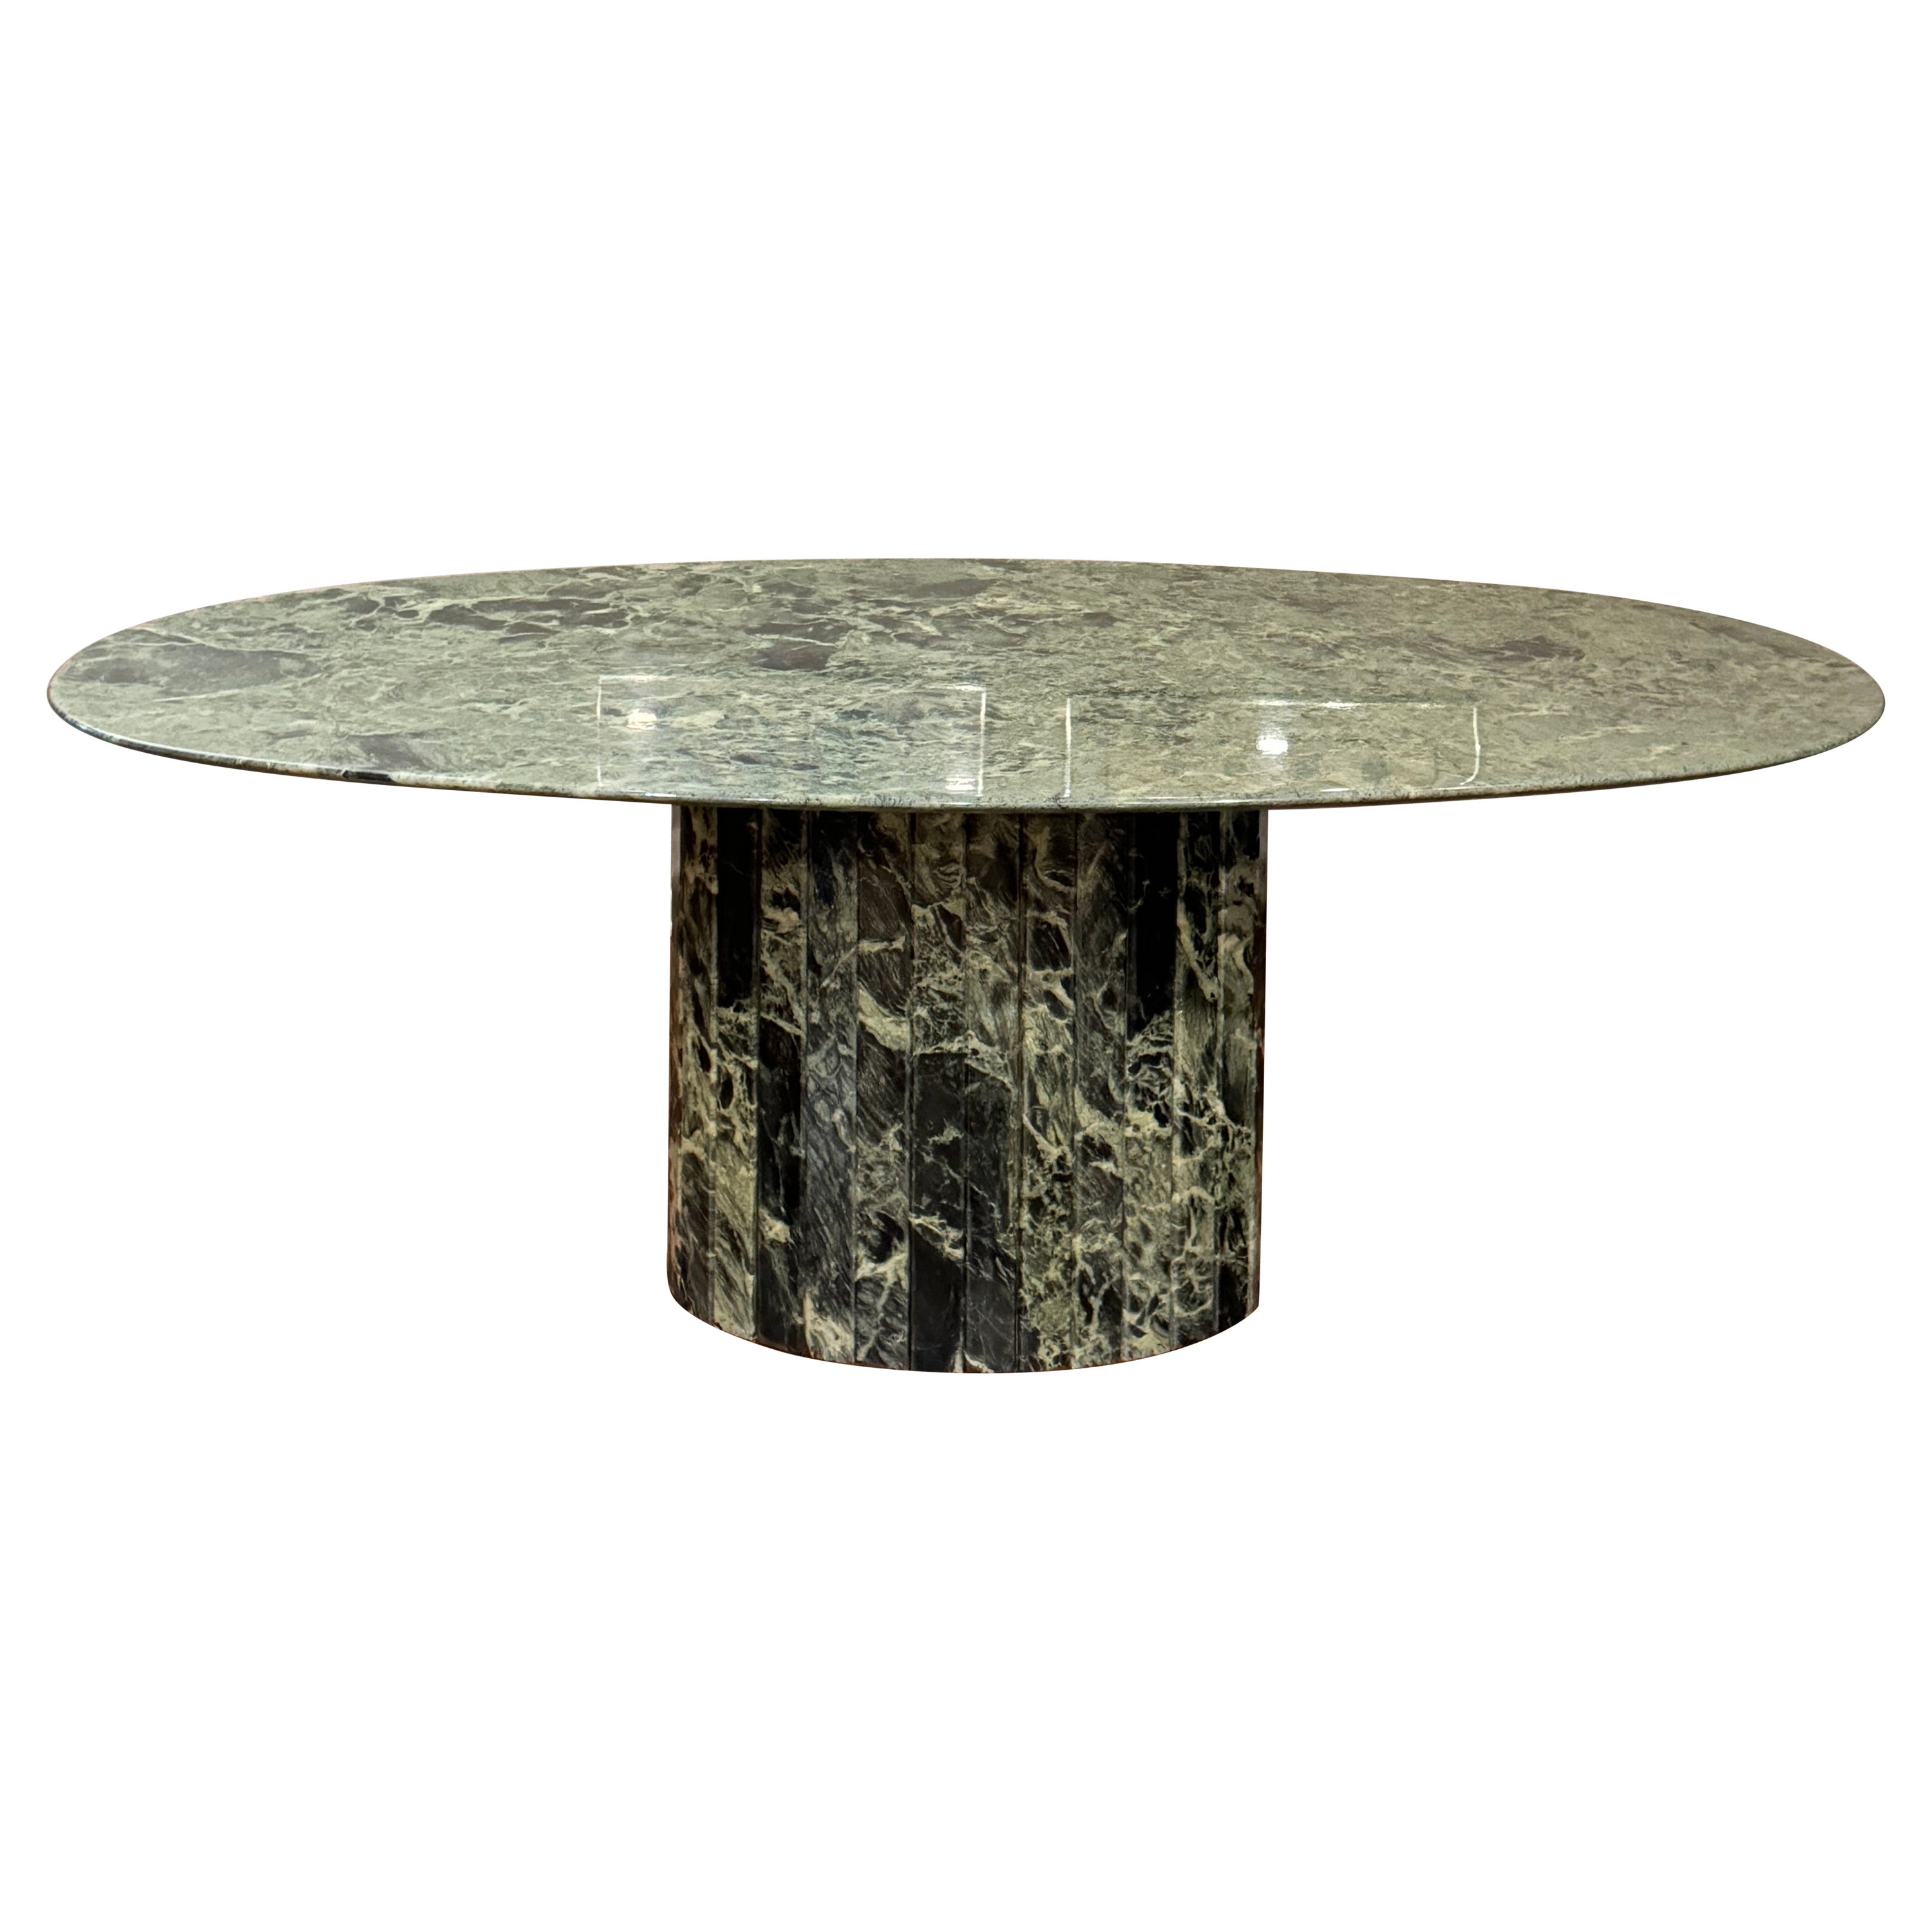 italian post modern green oval pedestal marble dining table by Roche & Bobois. 